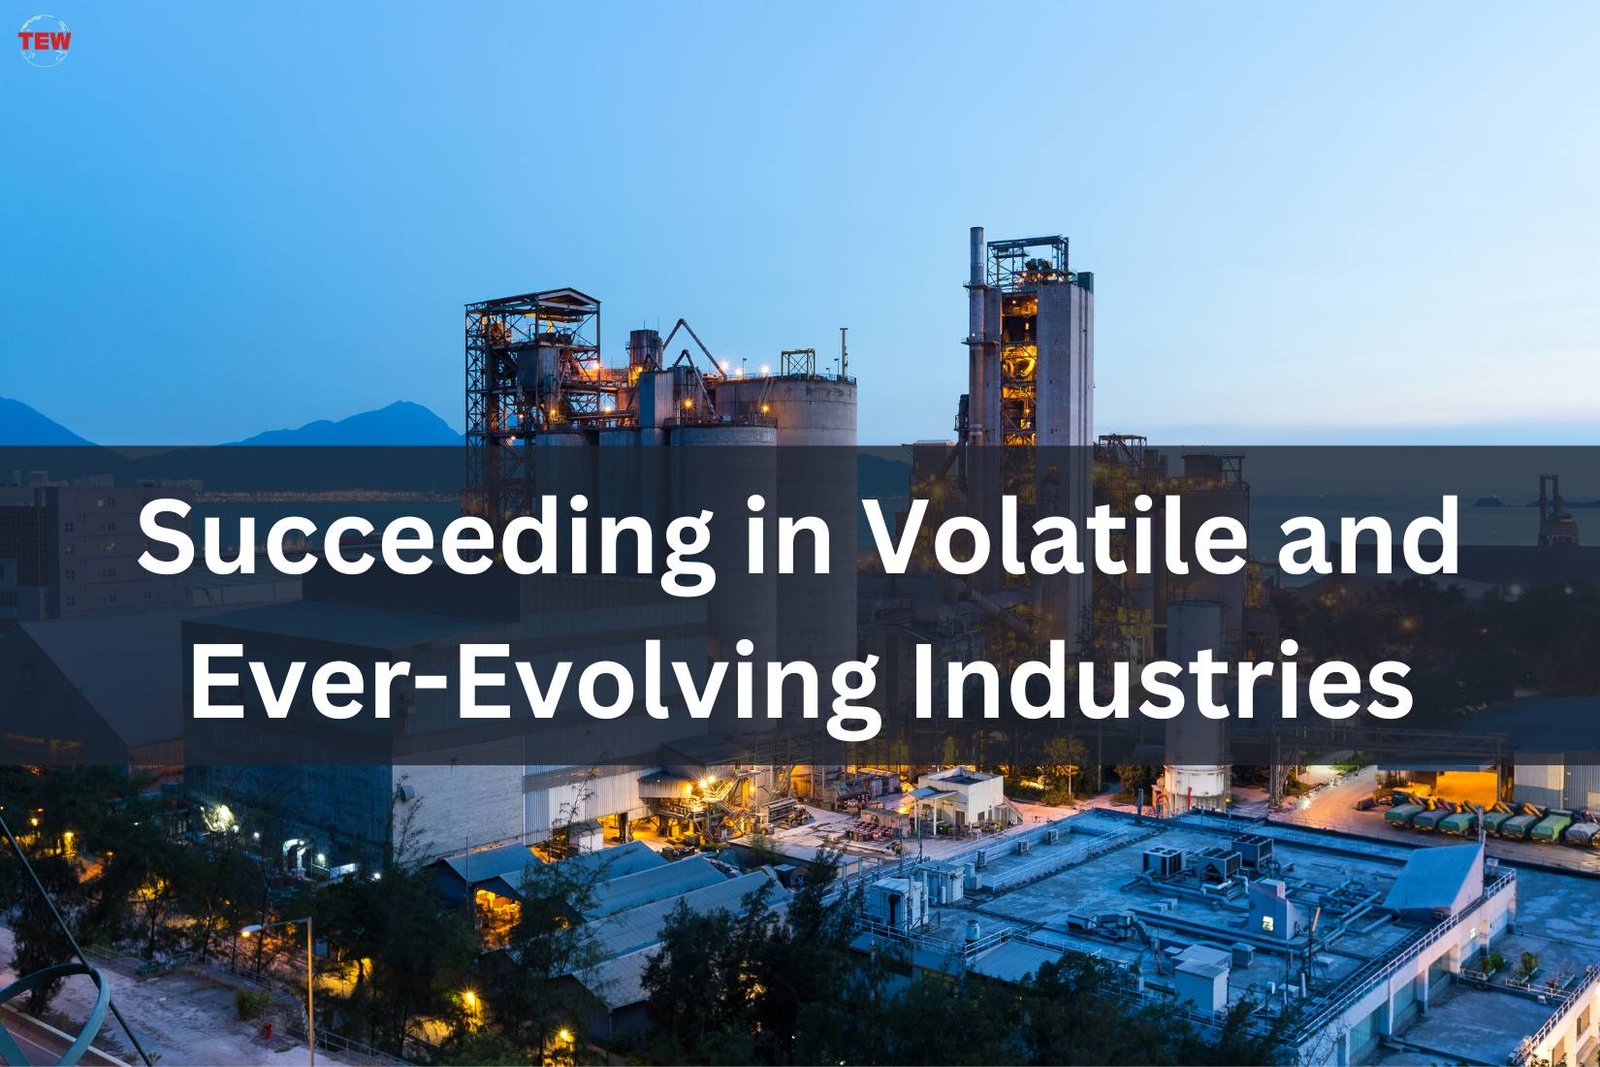 Succeeding in Volatile and Ever-Evolving Industries